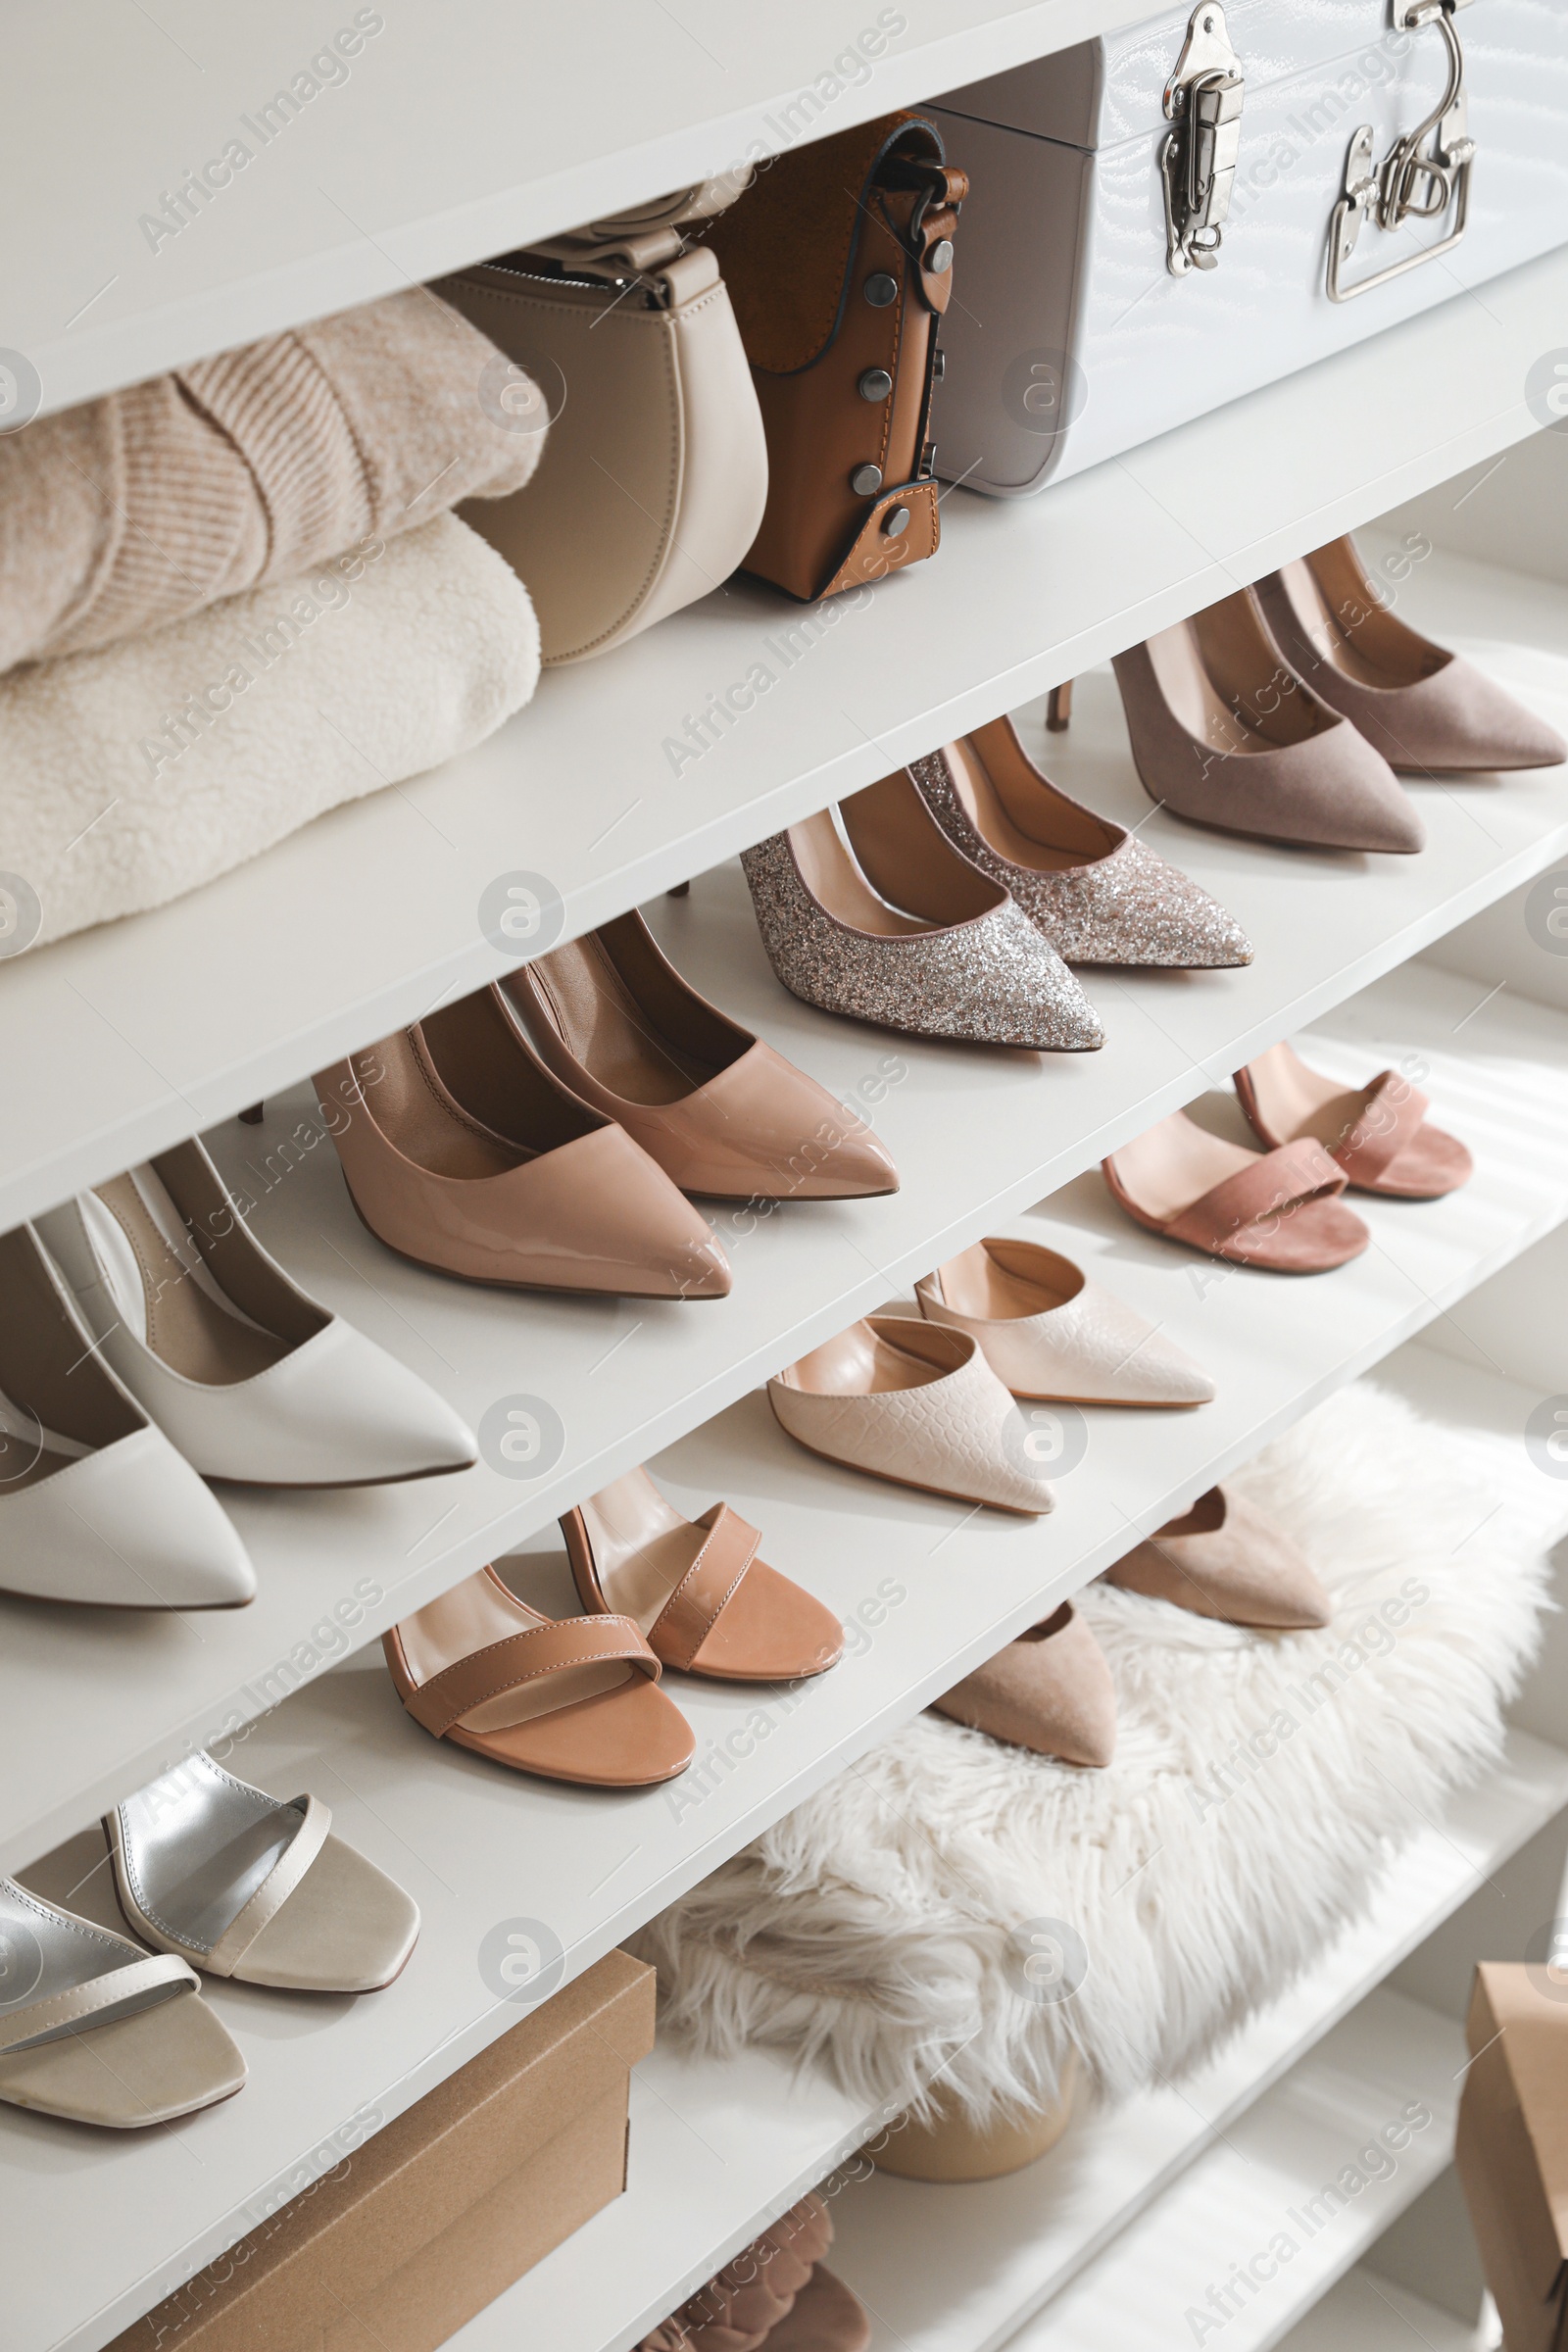 Photo of Stylish women's shoes, clothes and bags on shelving unit